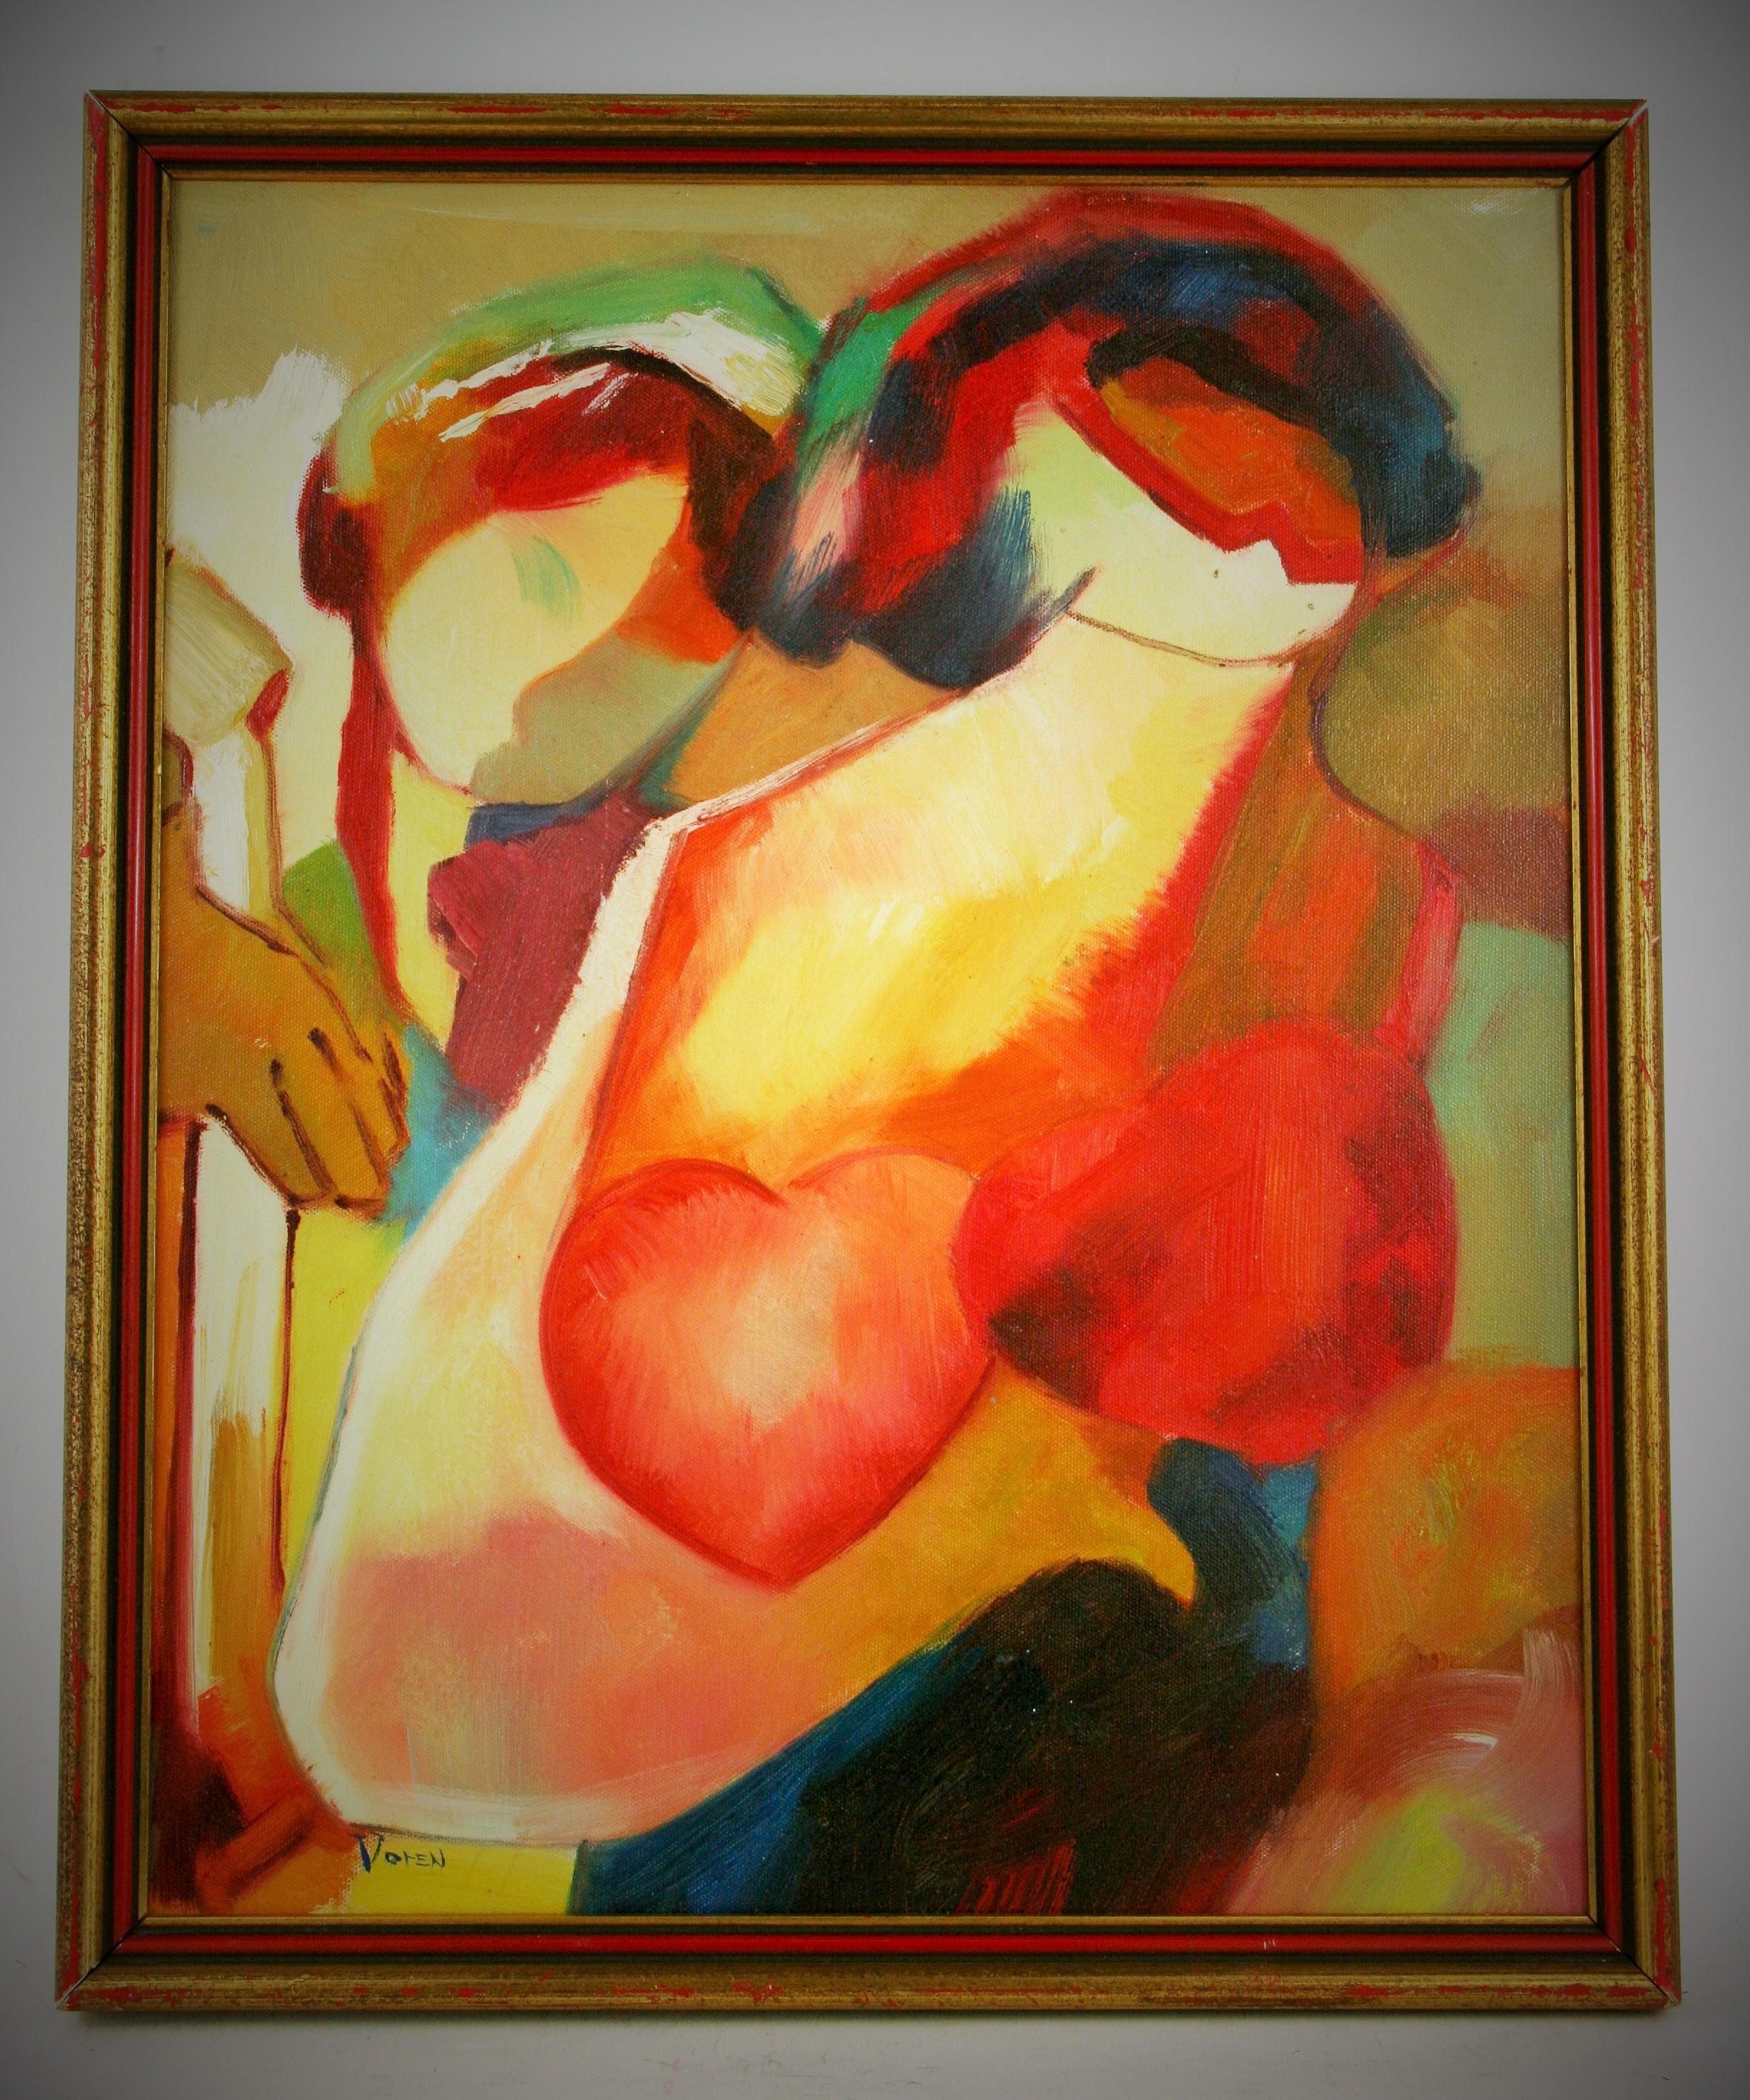 5-3435 Abstract  Female a figurative oil on artist board
Displayed in a gilt wood frame
Signed Voren